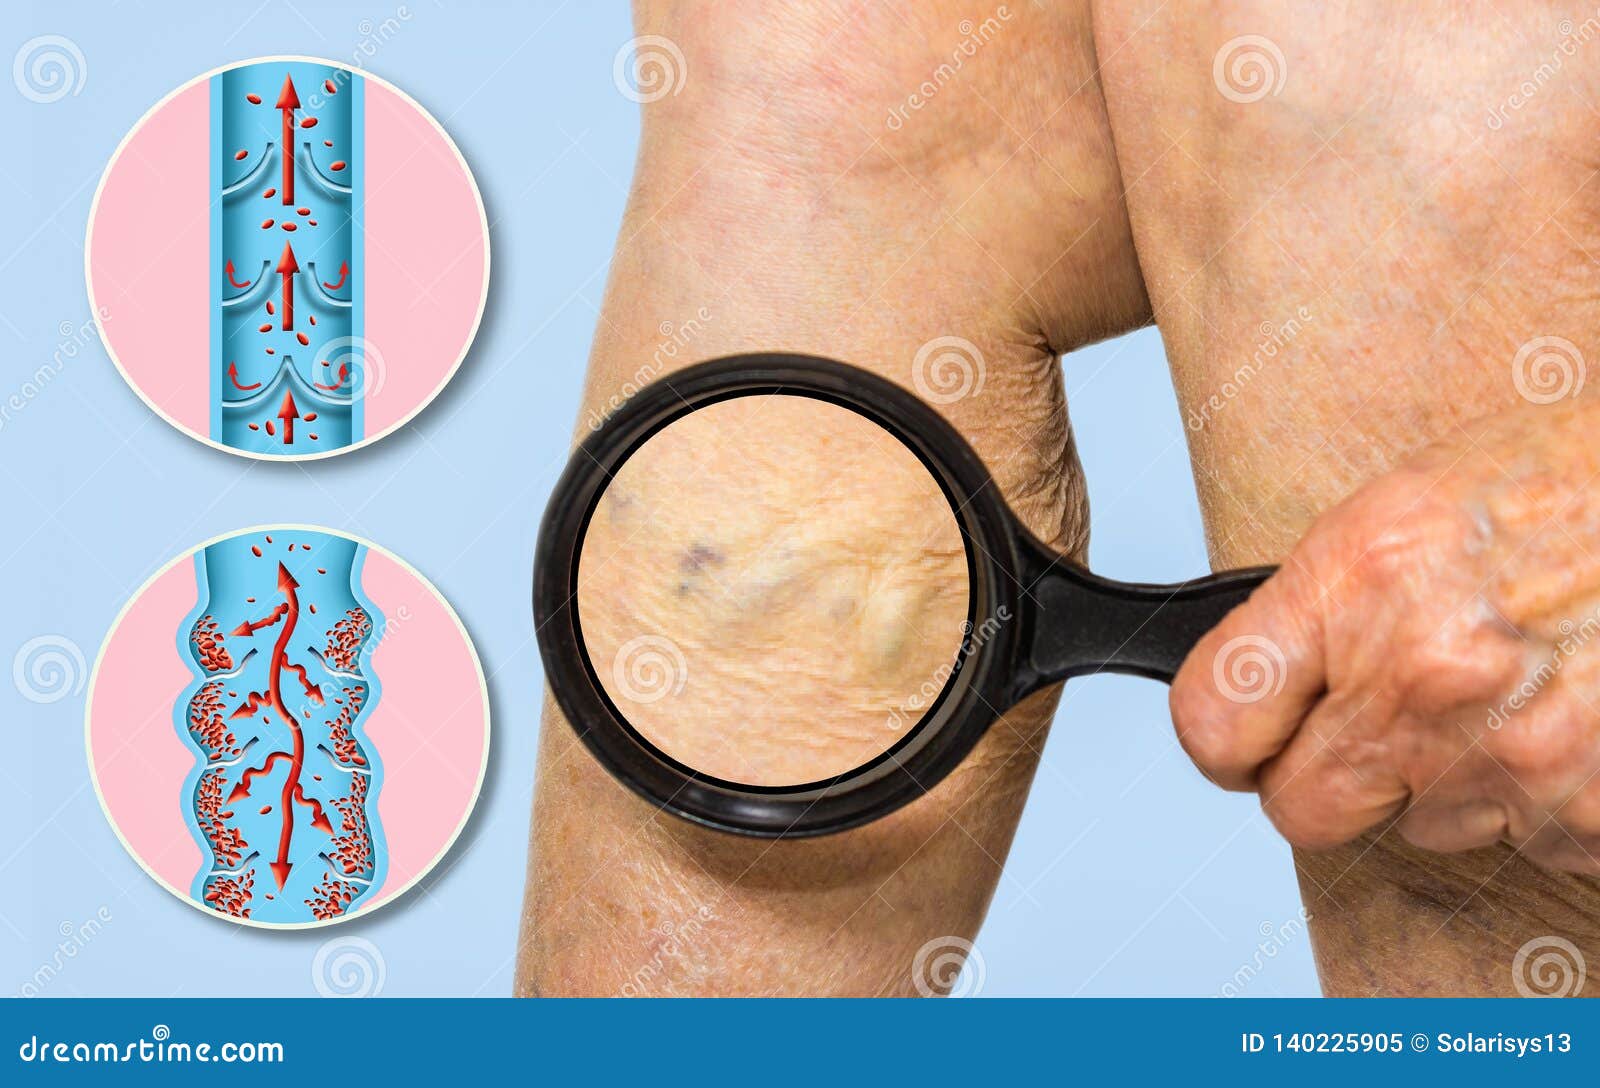 varicose veins on a female senior legs. the structure of normal and varicose veins.